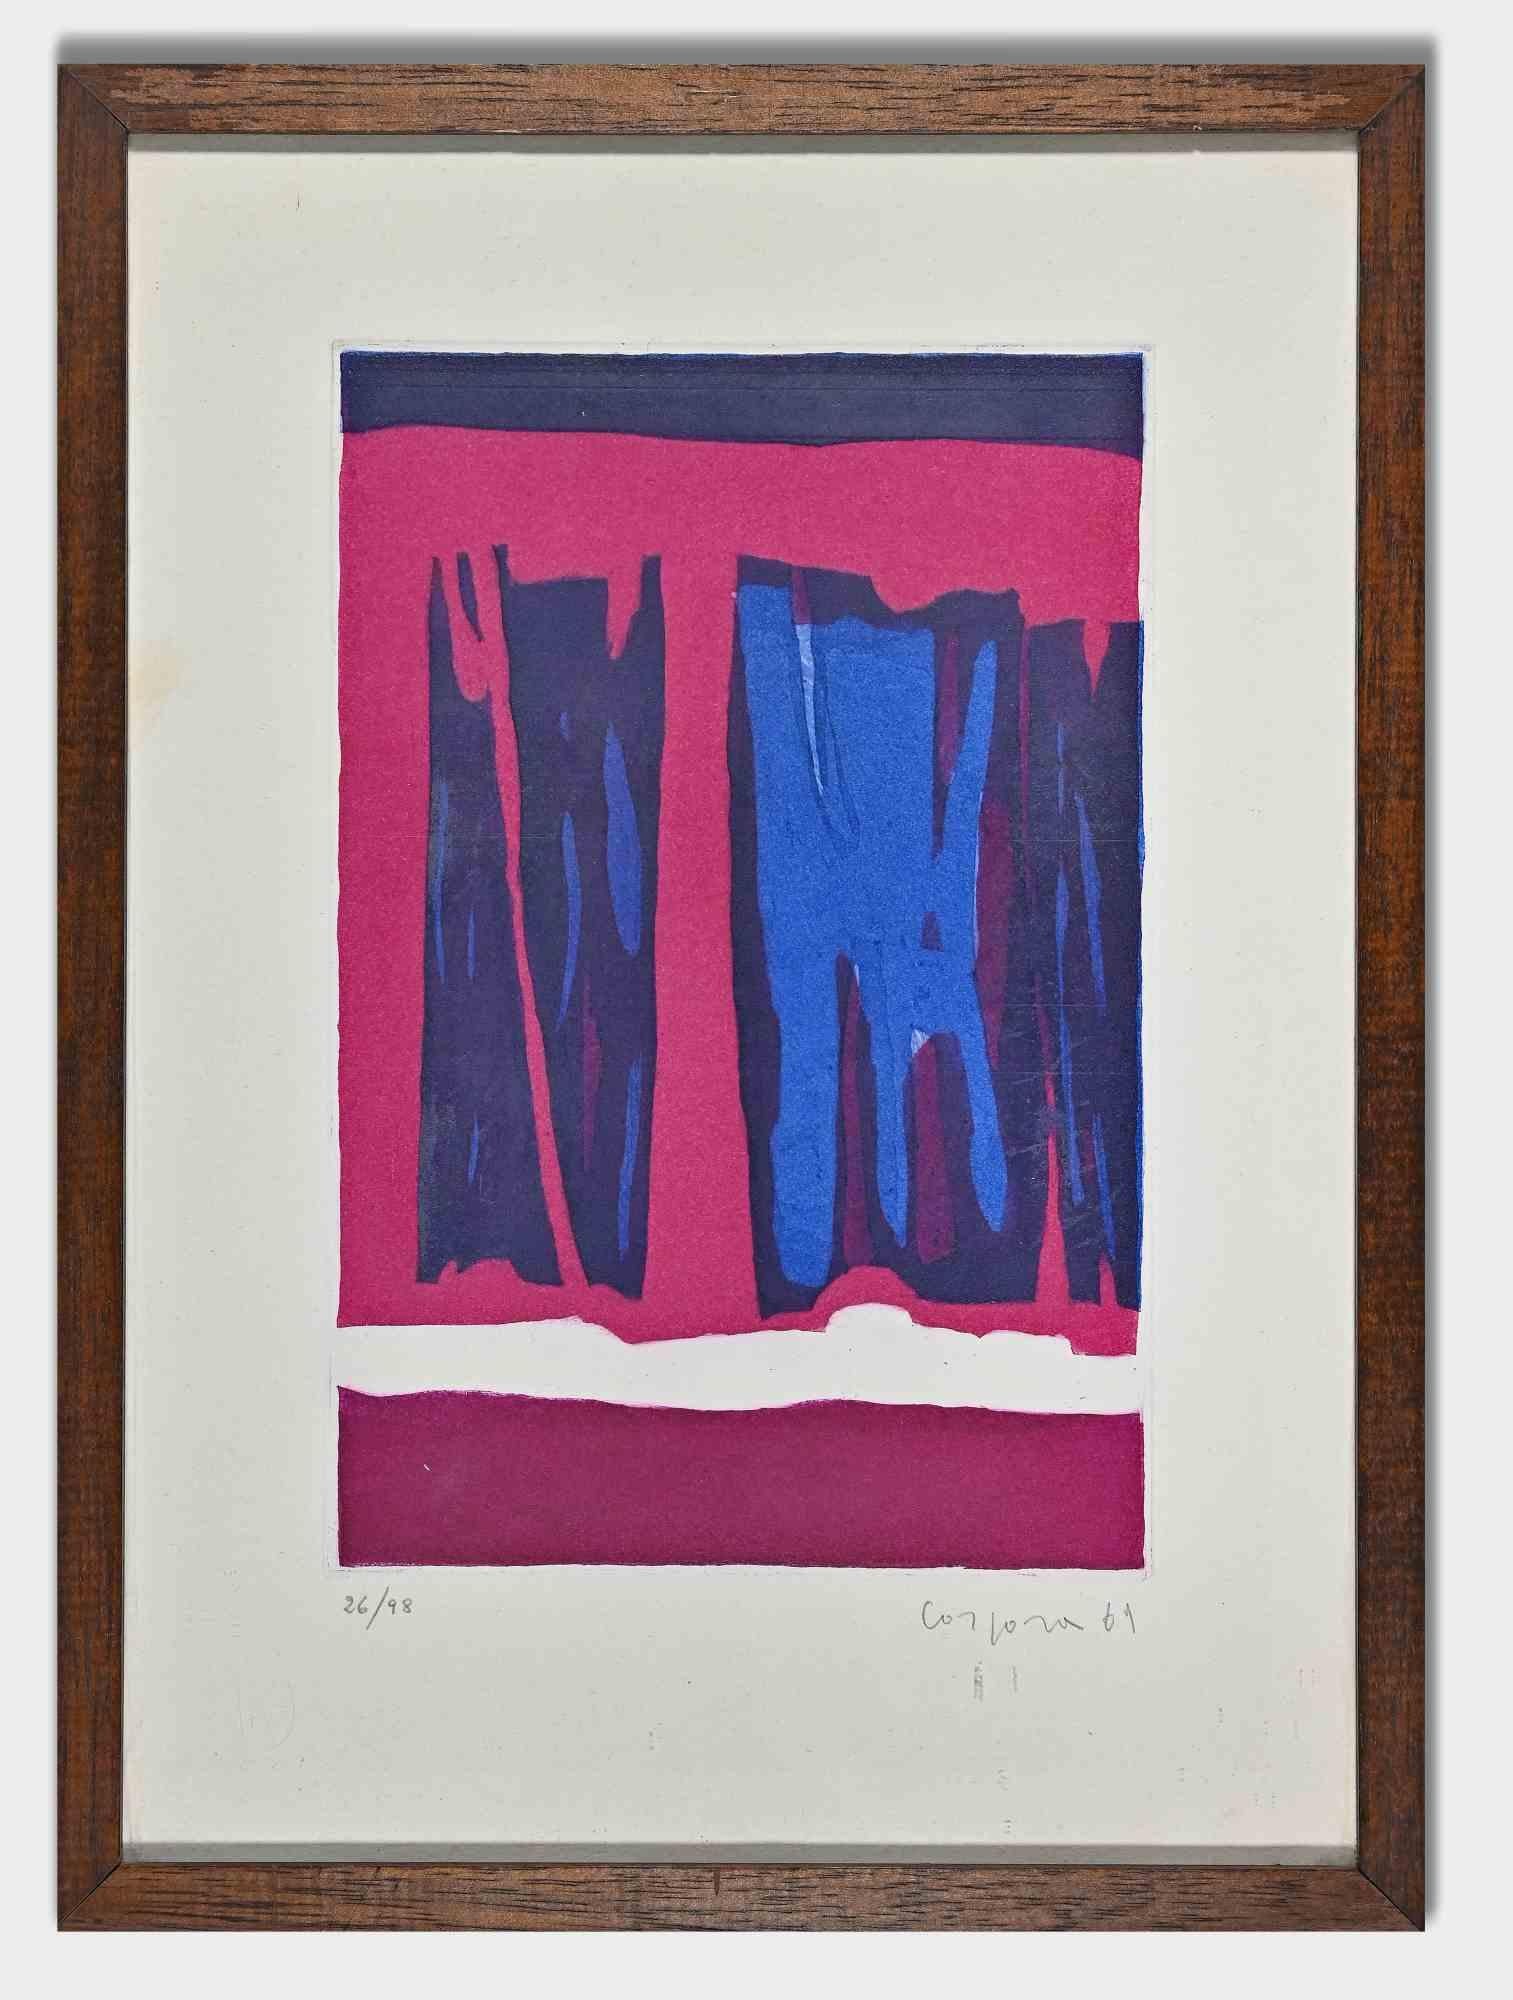 Composition is an original etching realized by by Antonio Corpora in 1969.

Hand signed and dated on the lower right margin. 

The colored beautiful print is from an edition of 98. Numbered on the lower left.

Includes frame: 37 x 1 x 27 cm
